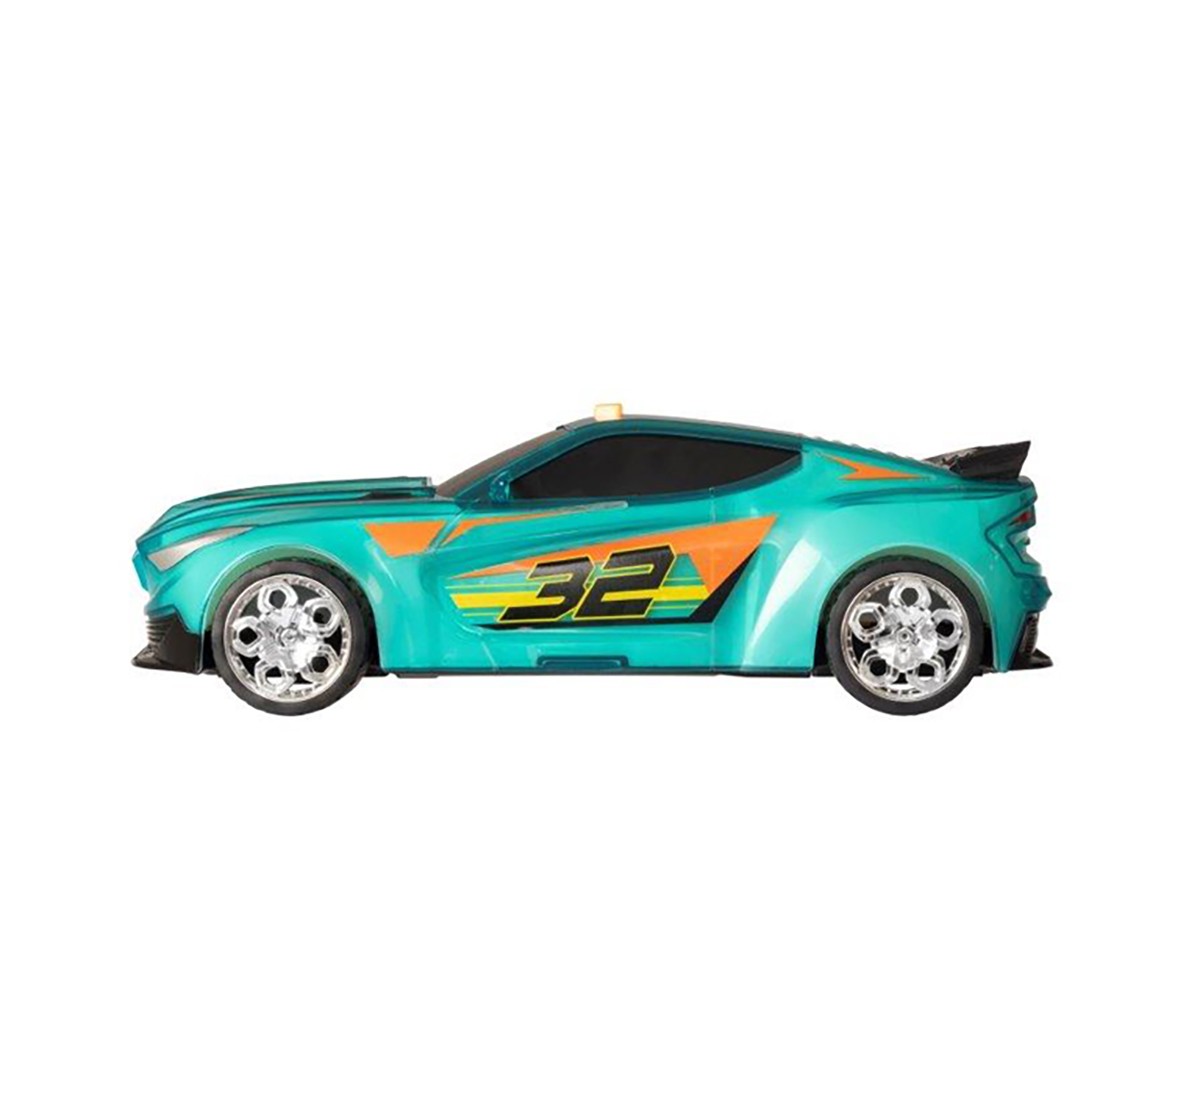 Teamsterz Light And Sound Street Starz Green Blue Car Vehicles for Kids age 3Y+ 